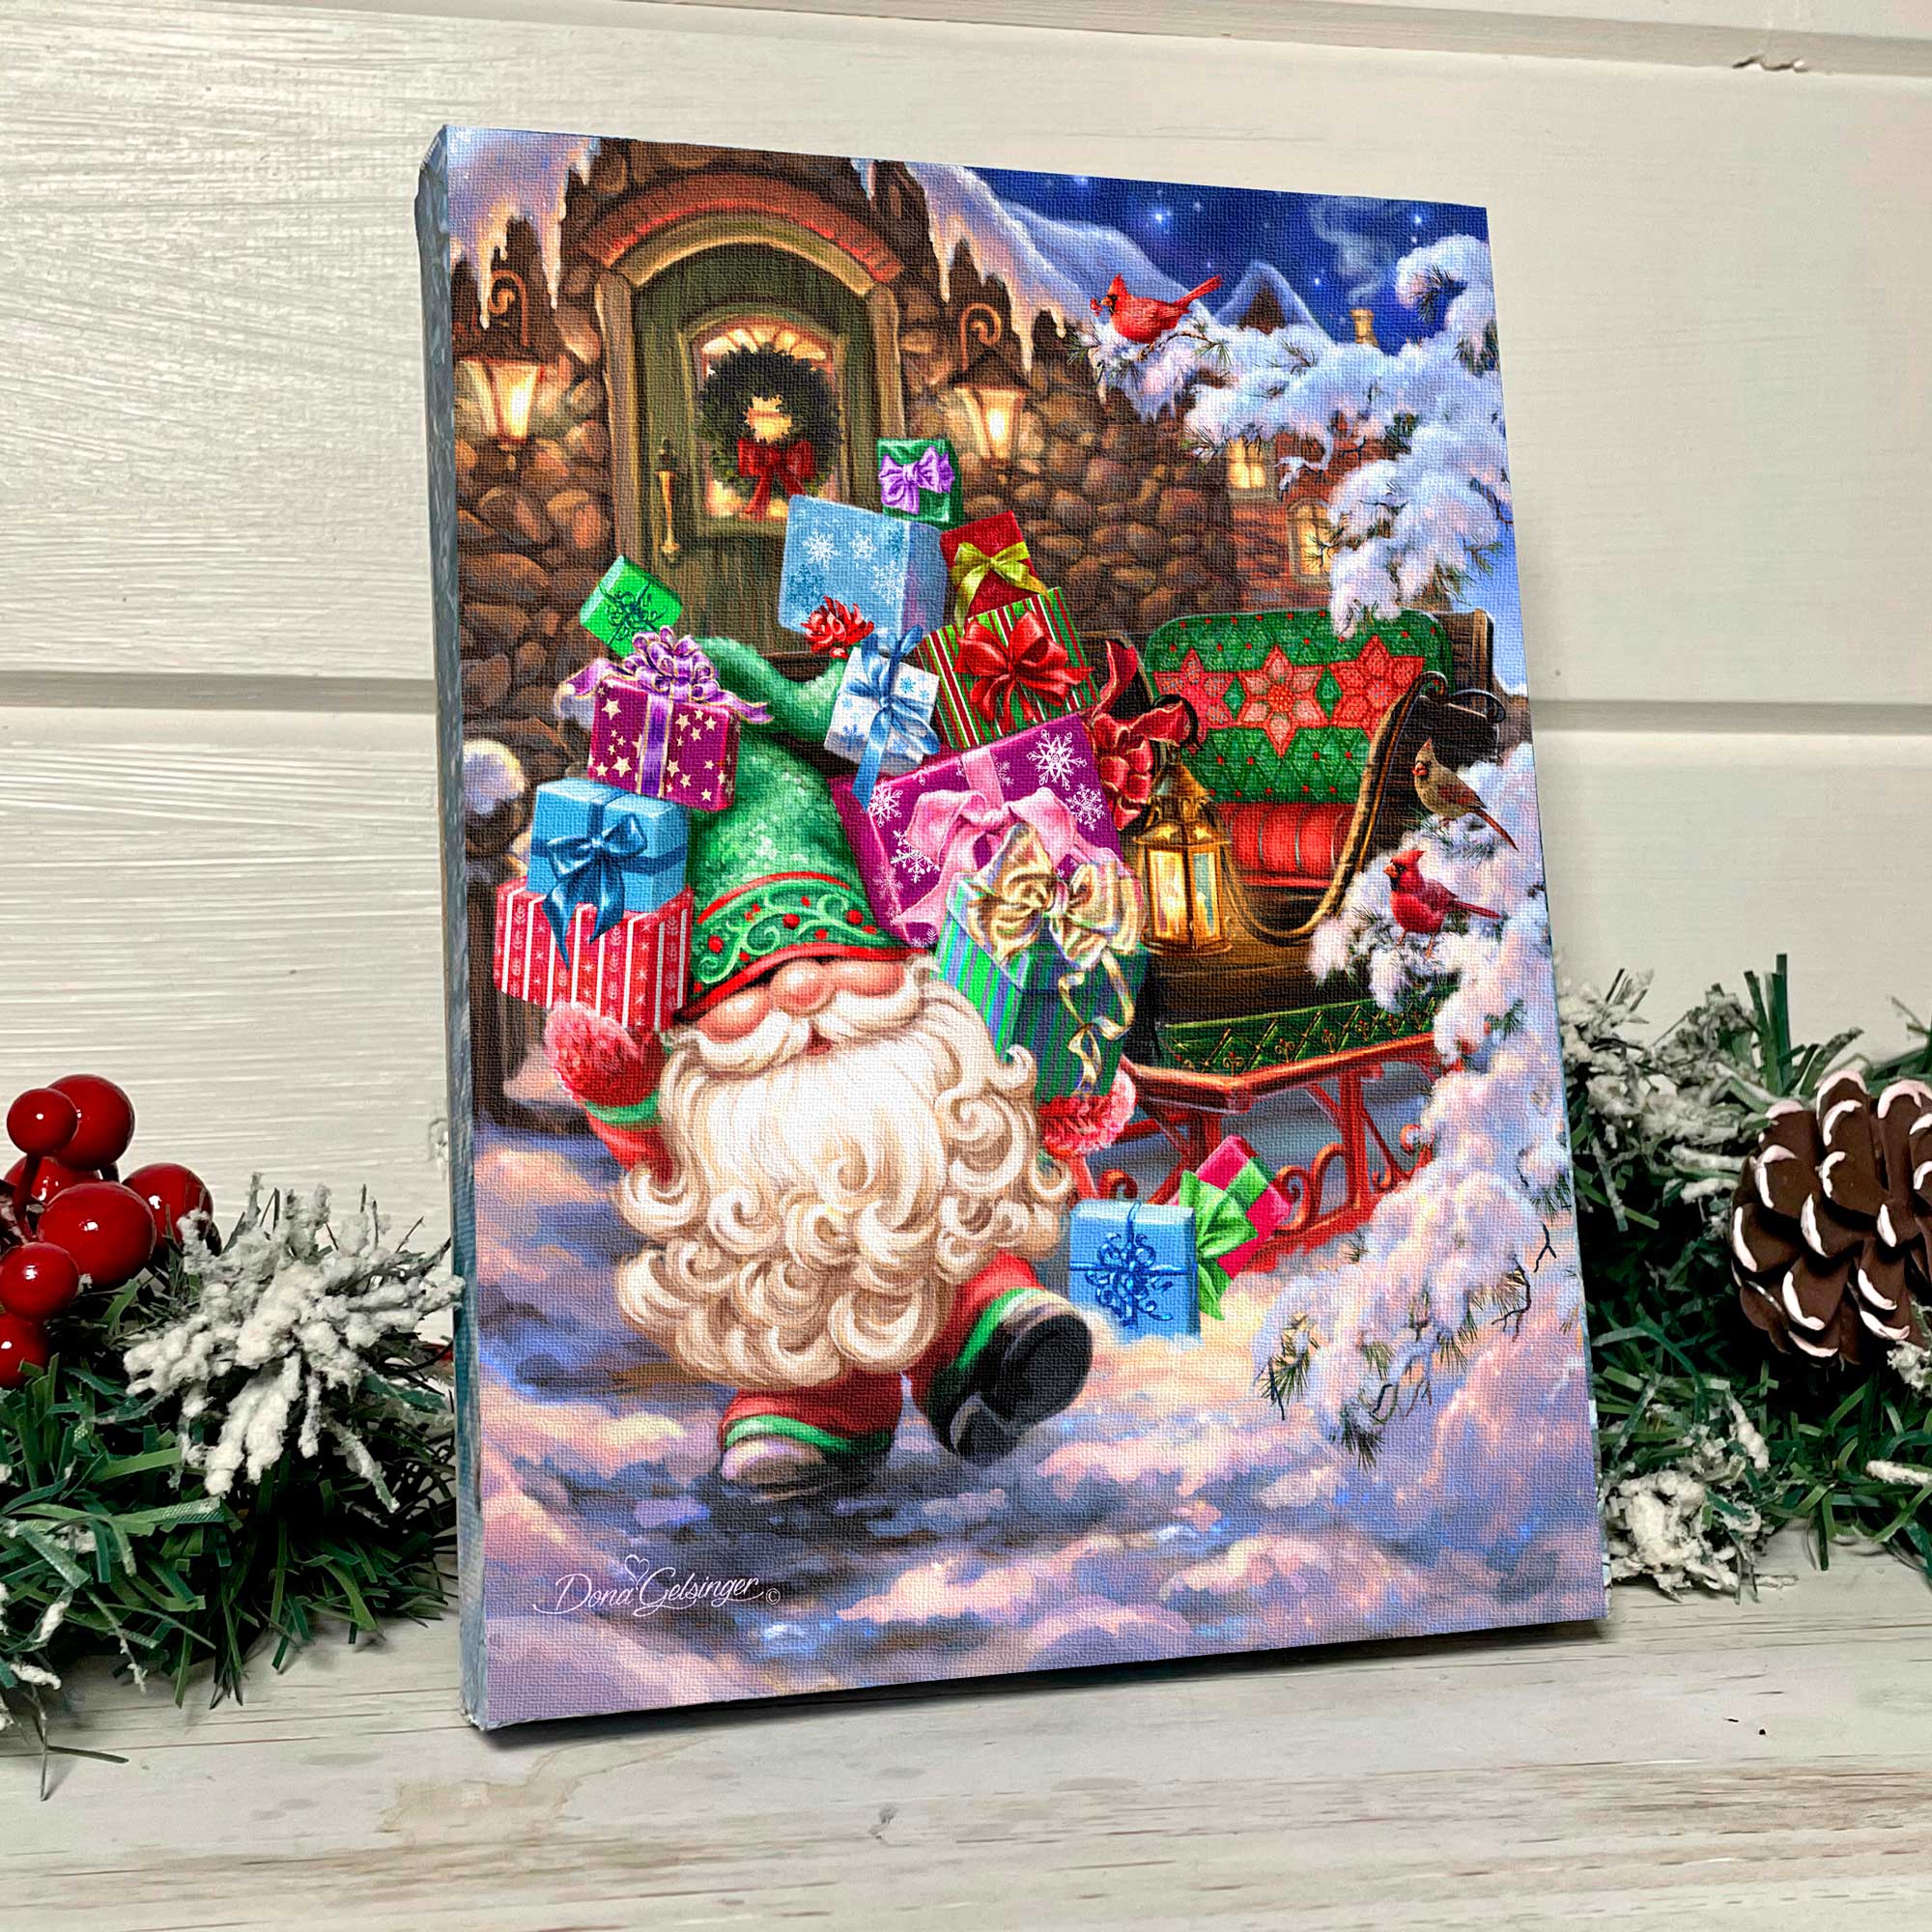 This delightful canvas features a cheerful gnome standing amidst a snowy landscape, his arms overflowing with presents for all the good boys and girls.  In the background, a cozy stone cottage and a festively decorated sleigh add to the enchanting scene.